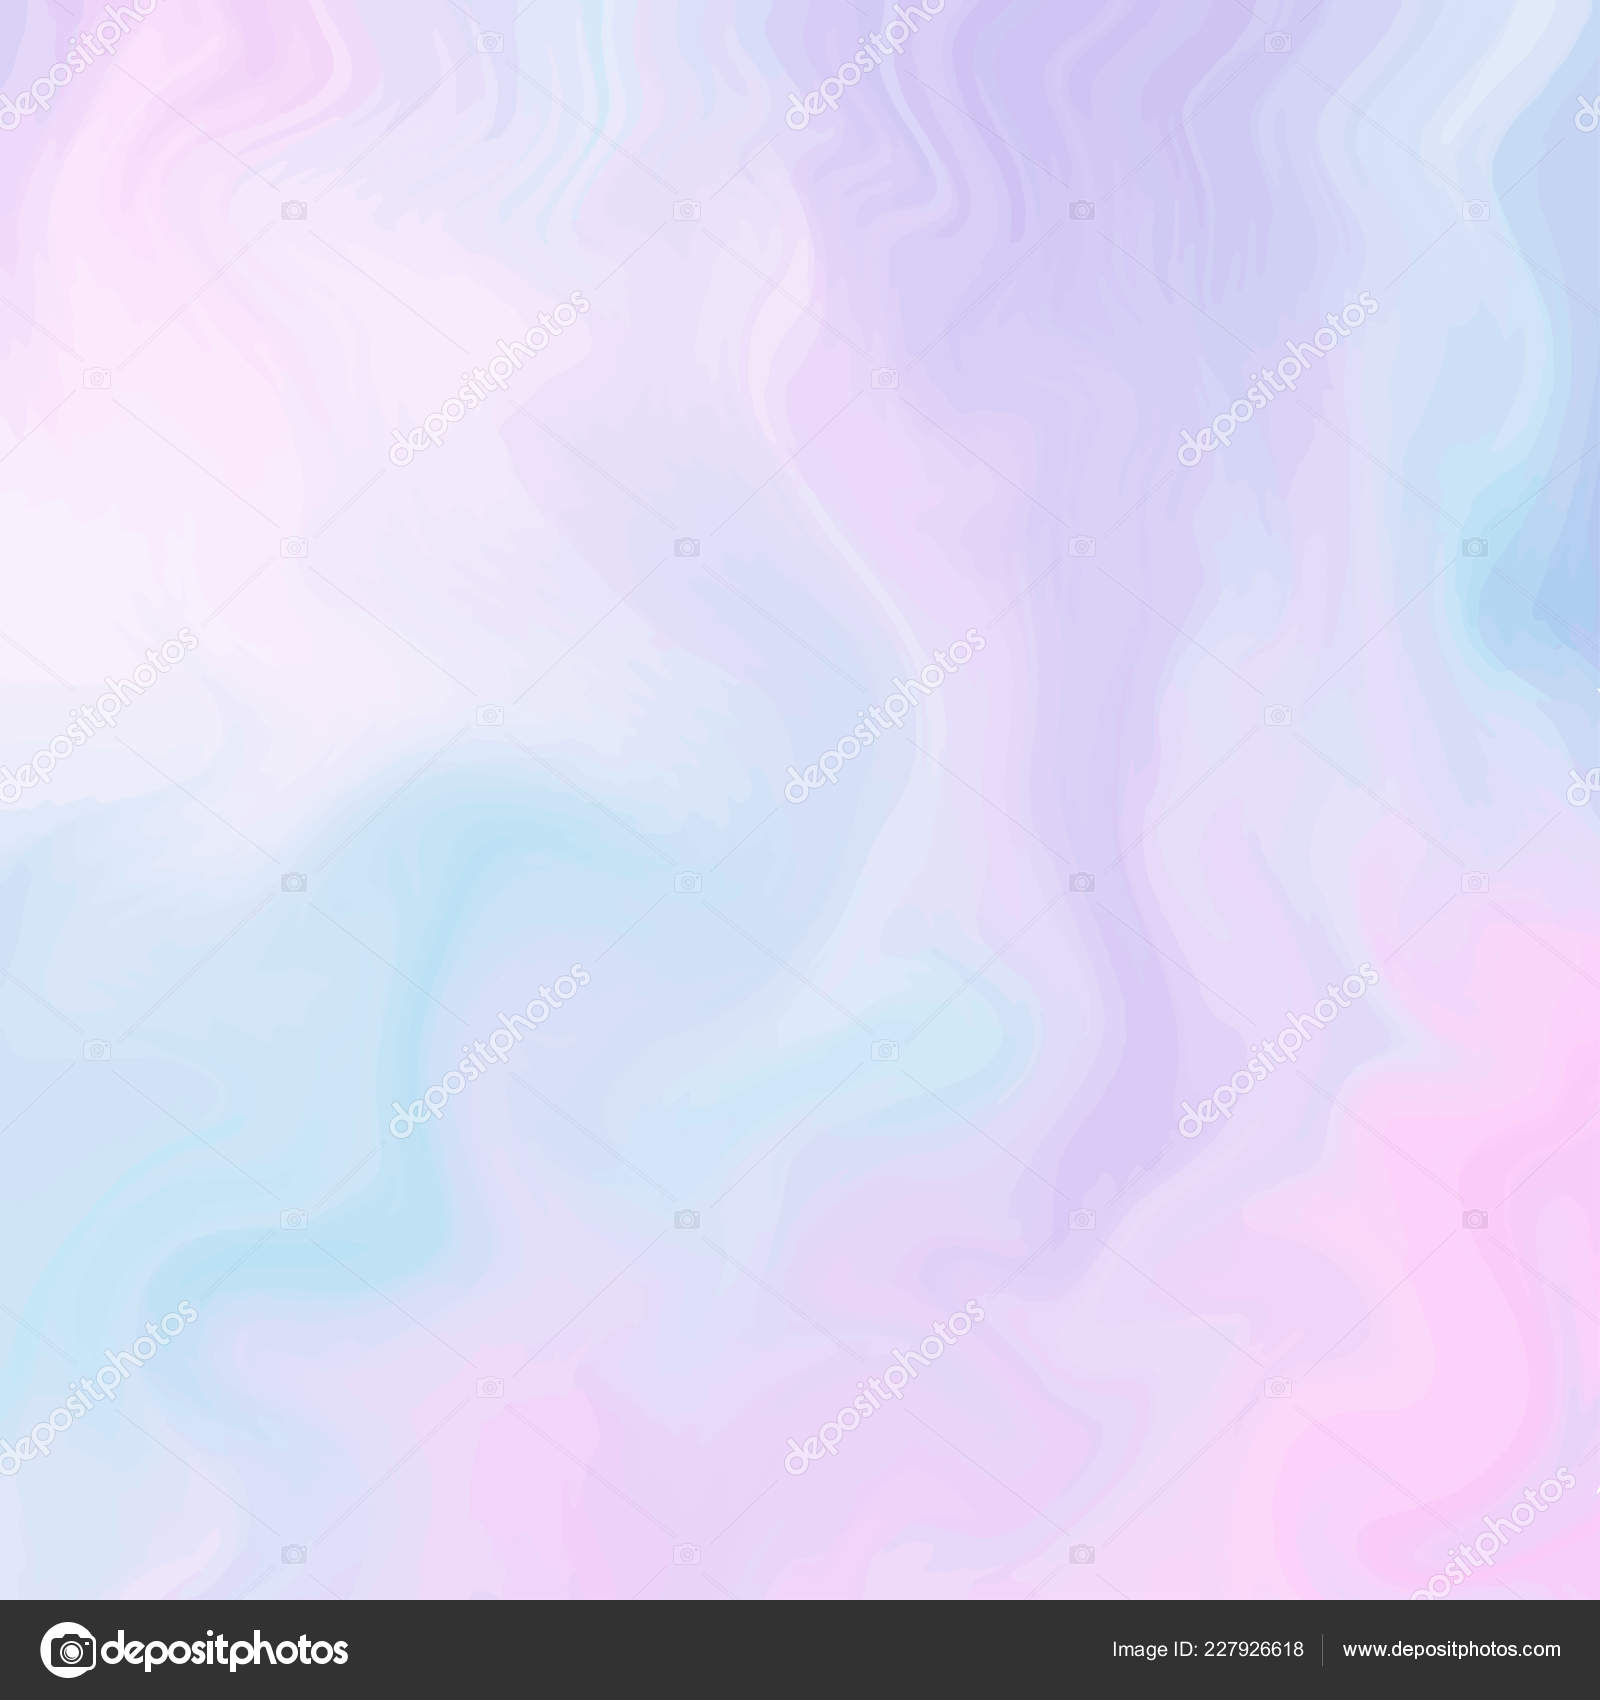 Magic Fairy And Unicorn Background With Light Pastel Rainbow Mesh Multicolor Backdrop In Girly Pink Violet And Blue Colors Fantasy Holographic Pattern With Blurs And Sparkles Stock Vector C Mcherevan 227926618